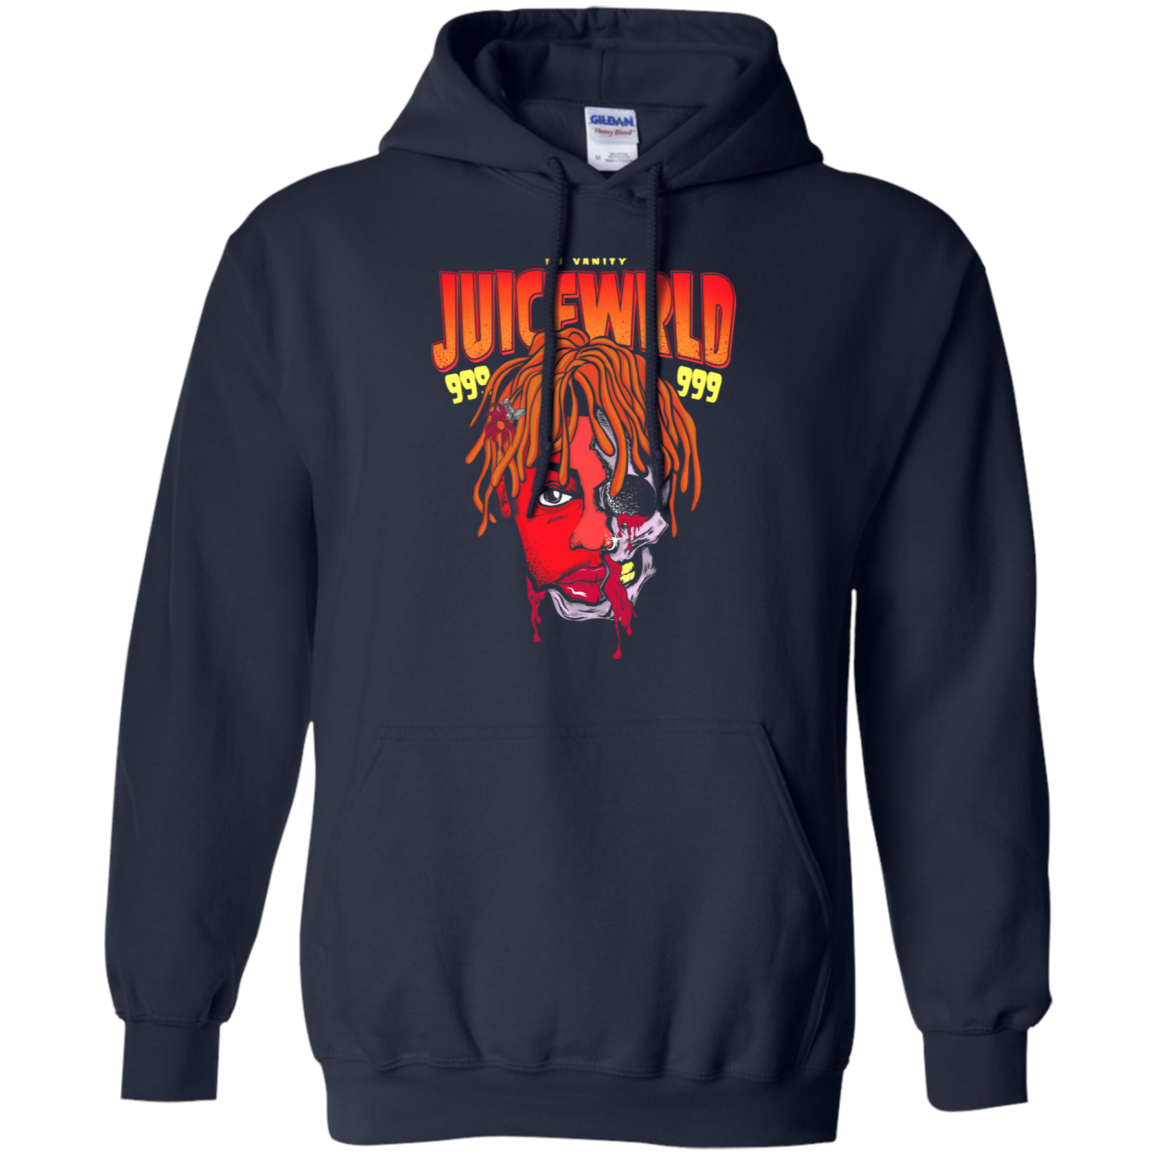 JUICE WRLD SKULL POSTER Pullover Hoodie - AGREEABLE1155 x 1155